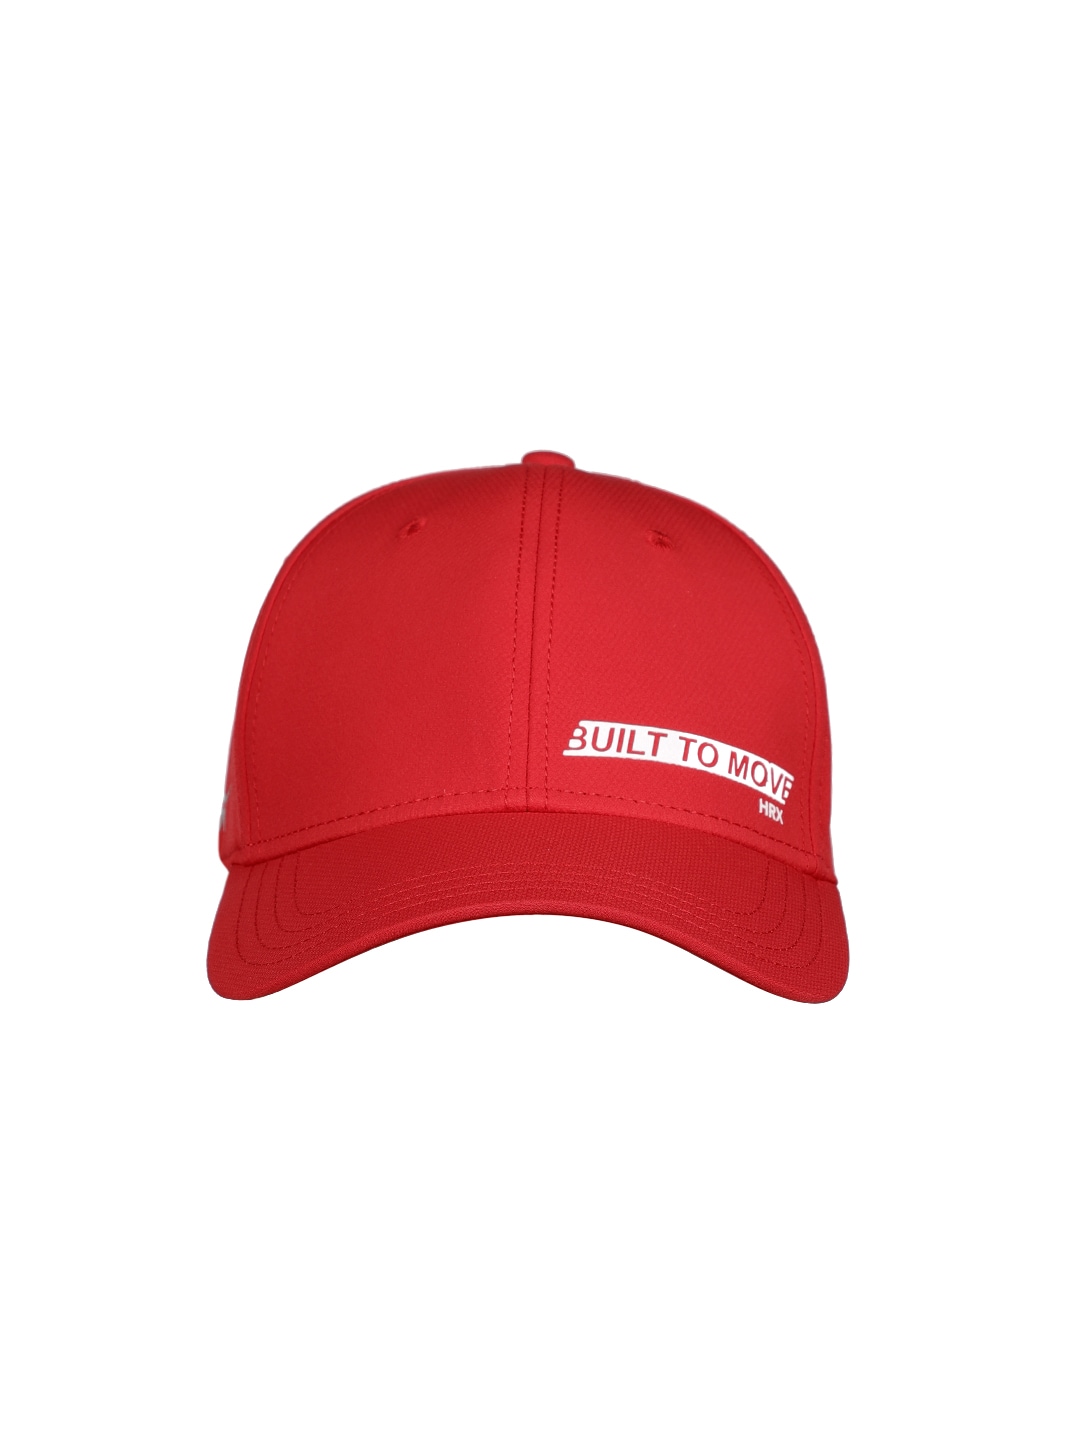 HRX by Hrithik Roshan Unisex Red Solid Lifestyle Cap Price in India